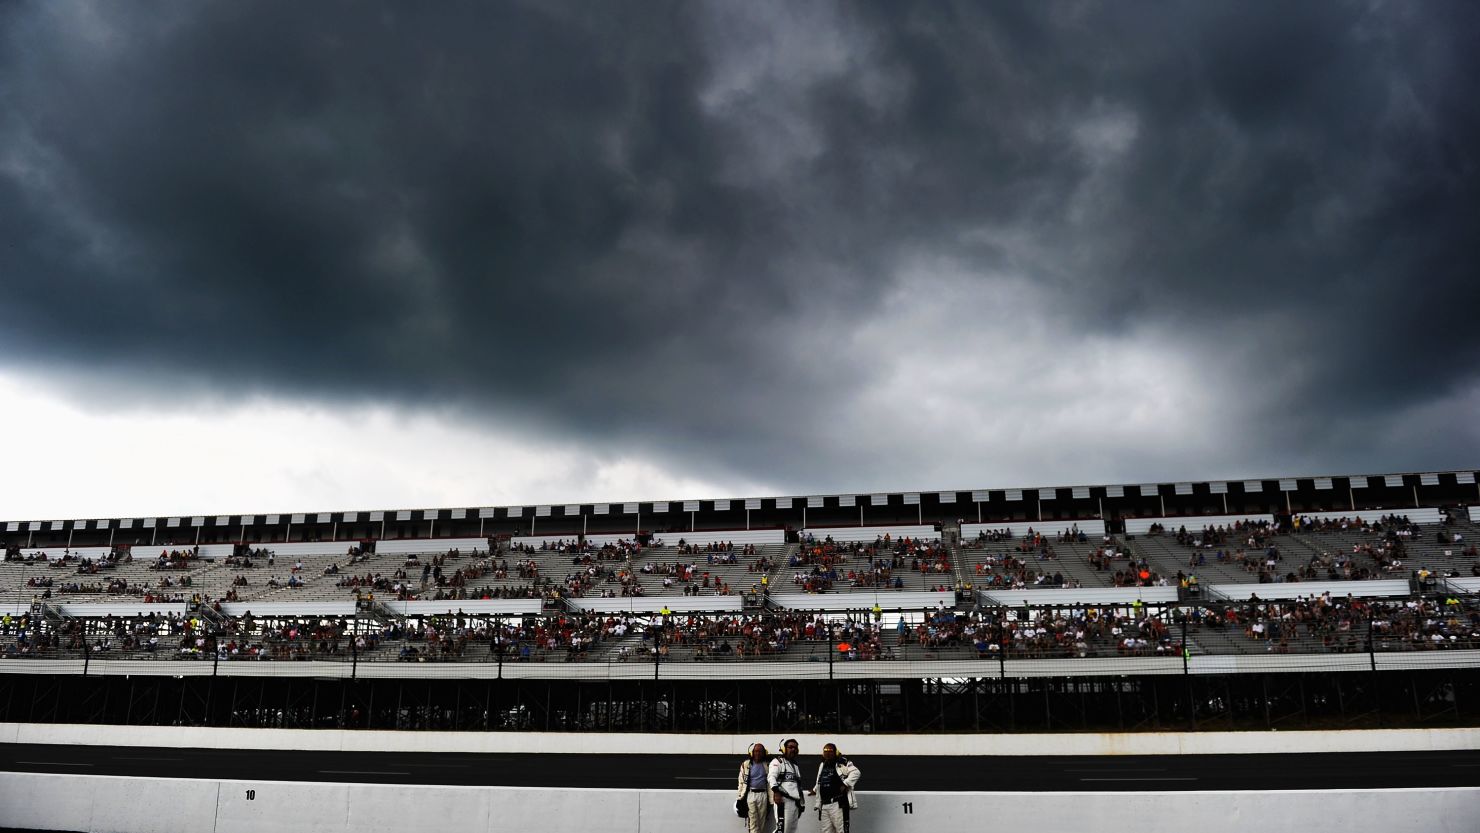 Dark clouds form over the racetrack before the start of the NASCAR Sprint Cup Series Pennsylvania 400 at Pocono Raceway.